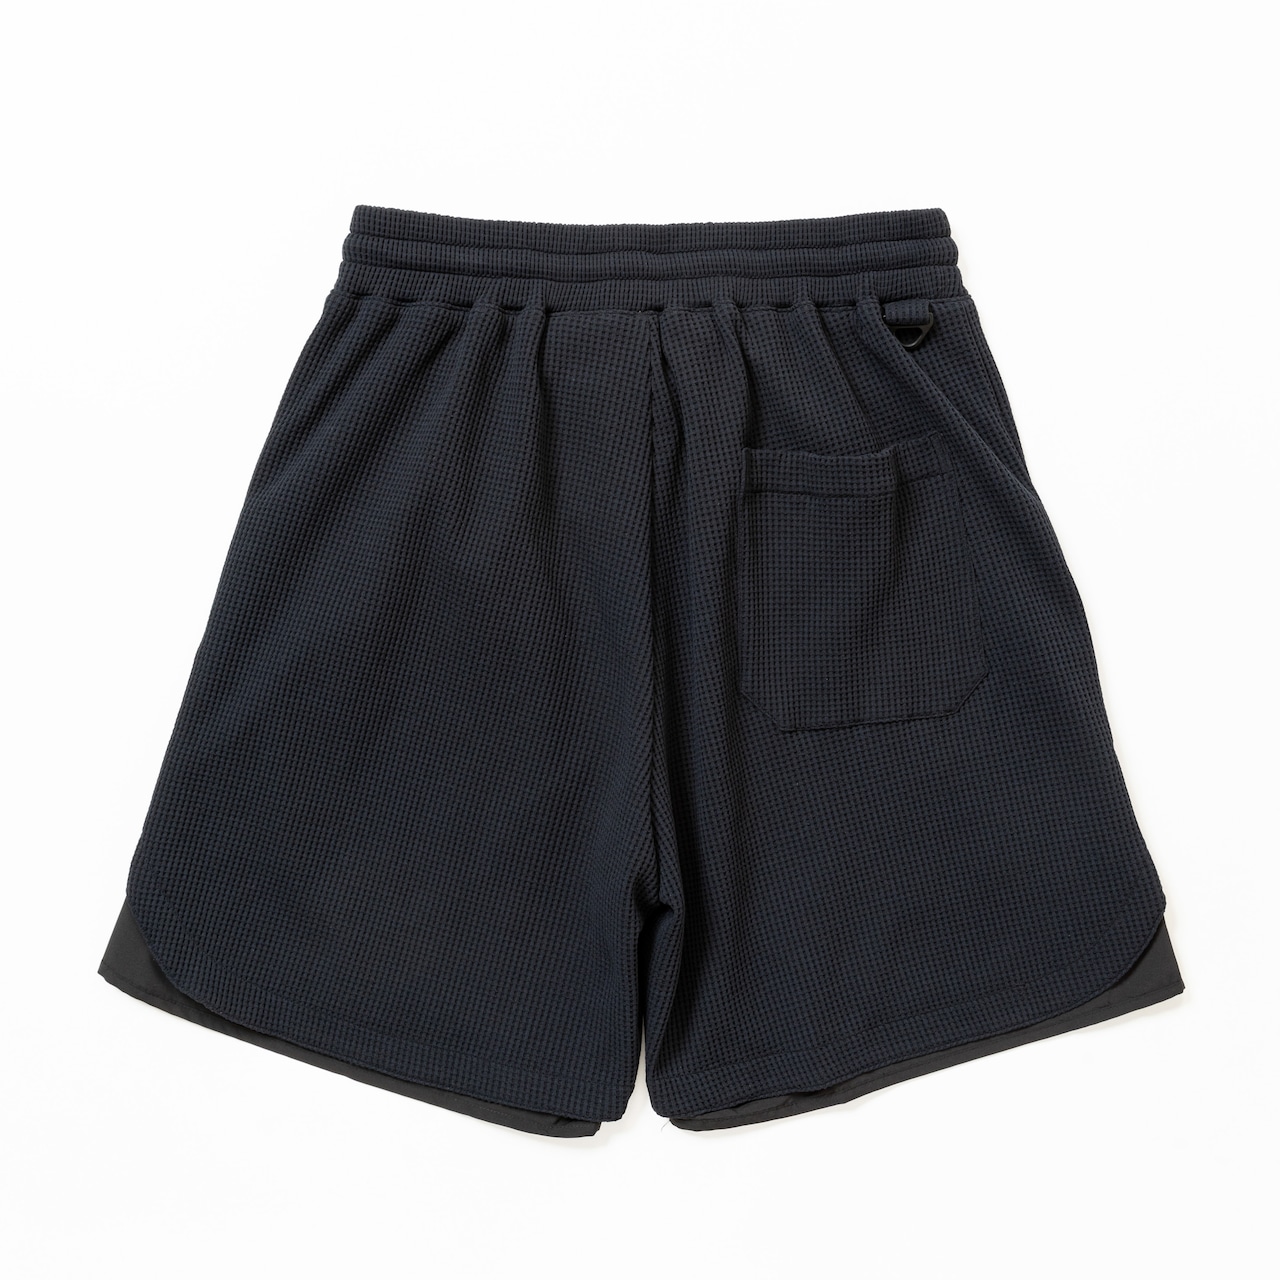 meanswhile   SOLOTEX® Easy Shorts